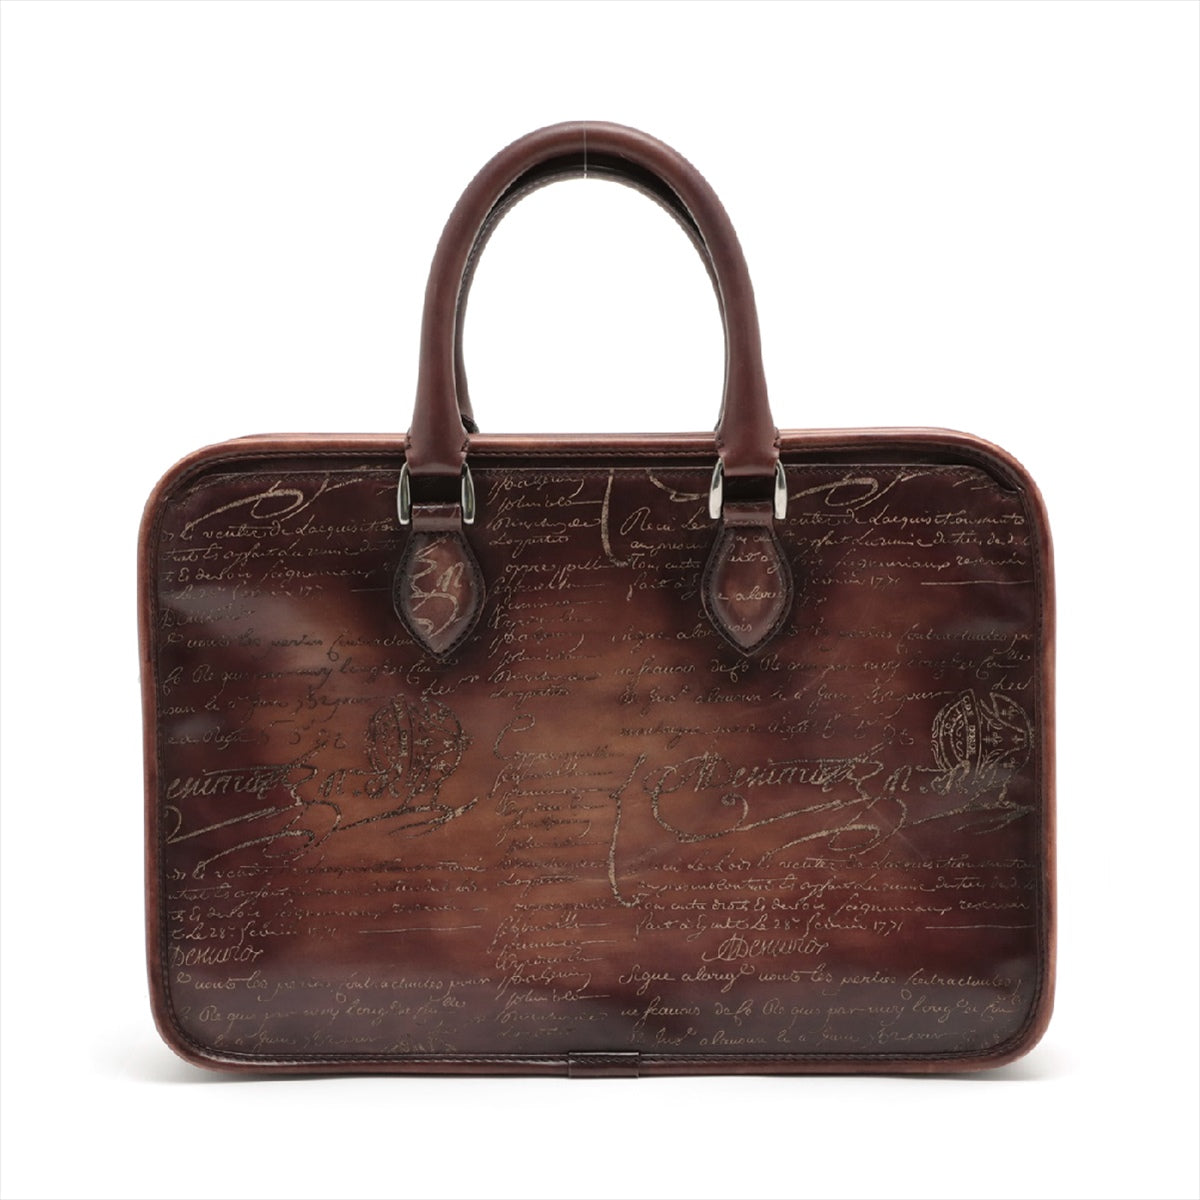 Berluti Calligraphy Un Jour Leather Business bag Brown There are exterior steering wheel marks